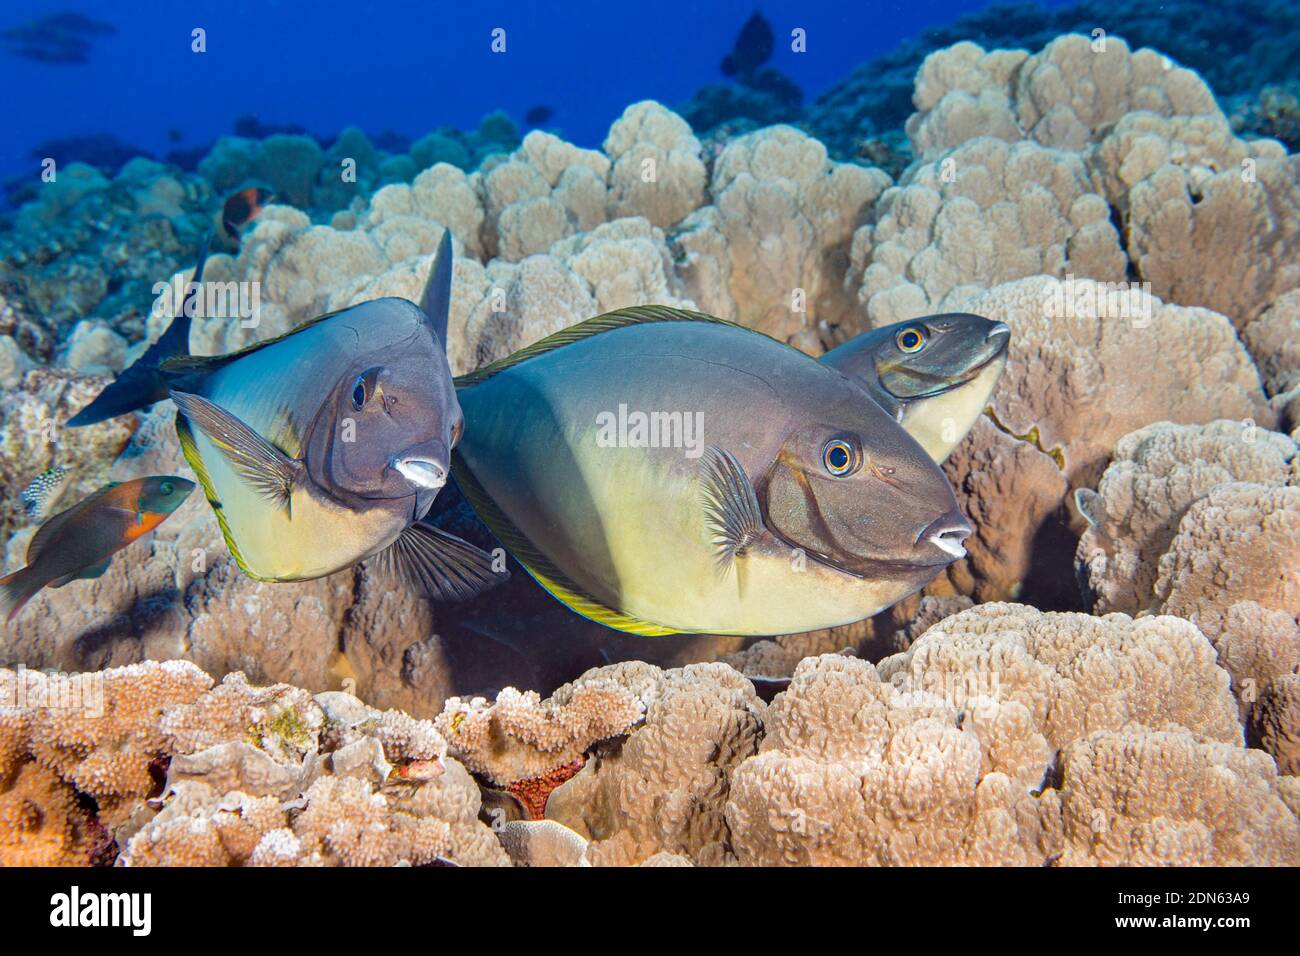 This trio of sleek unicornfish, Naso hexacanthus, has made a stop at a cleaning station where an endemic saddle wrasse, Thalassoma duperrey, is lookin Stock Photo